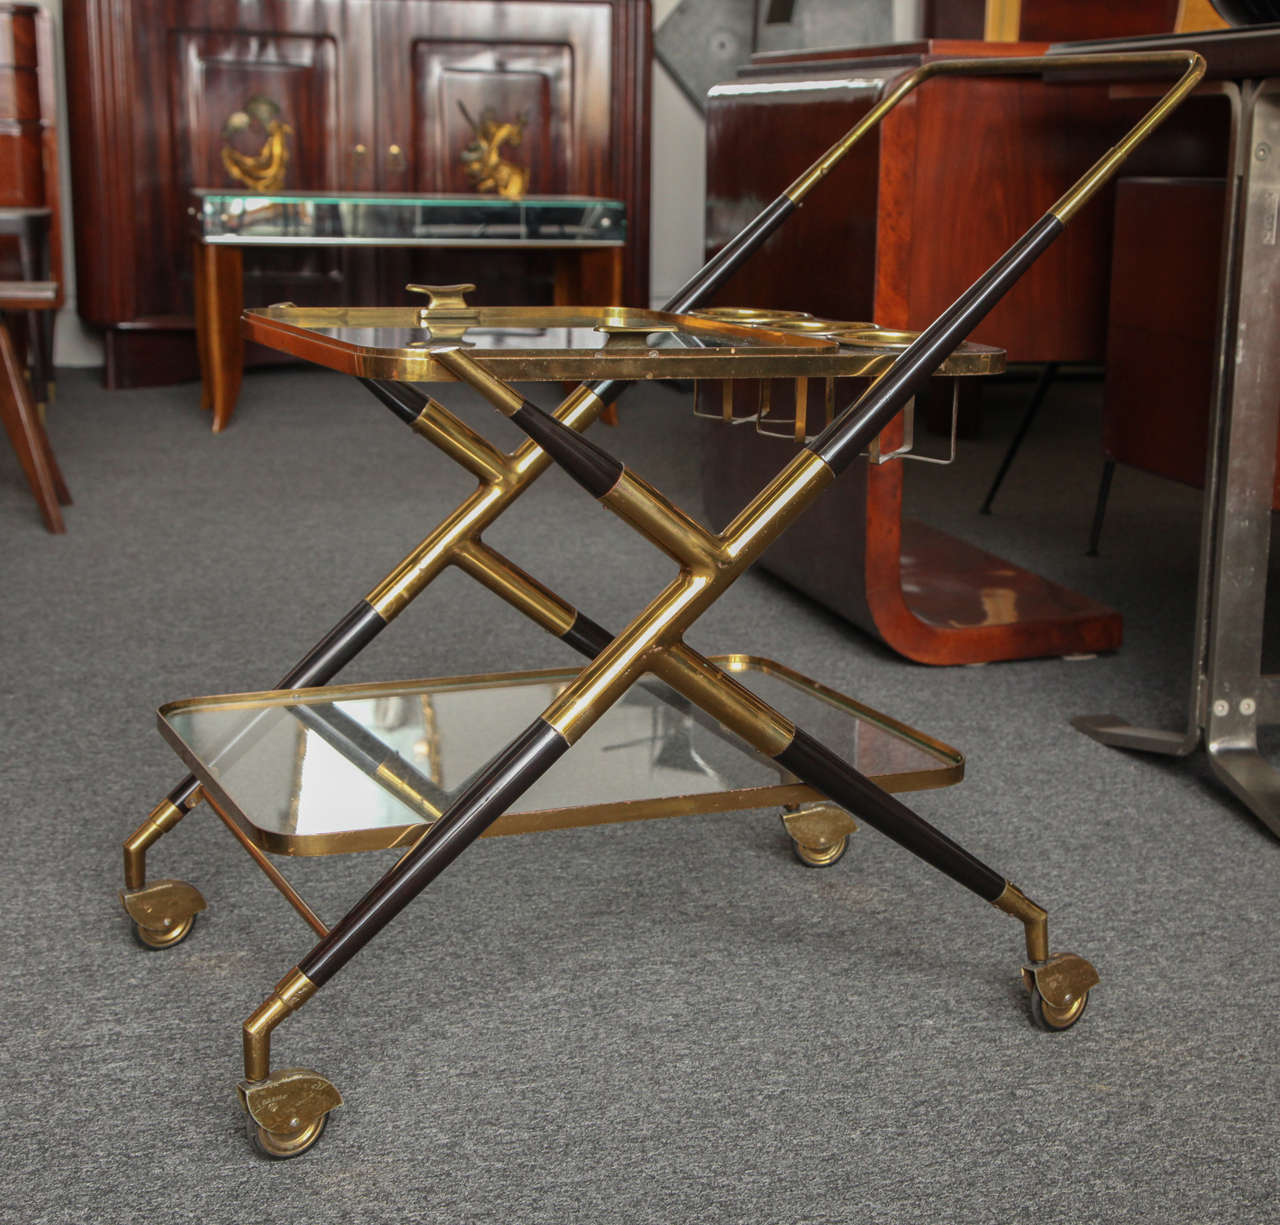 BEAUTIFUL BAR / SERVING CART MADE IN MILAN 1955,DESIGNED By CESARE LACCA. HAS A REMOVABLE SERVING TRAY WITH BOTTLE RACK NICE BRACE FITTINGS.